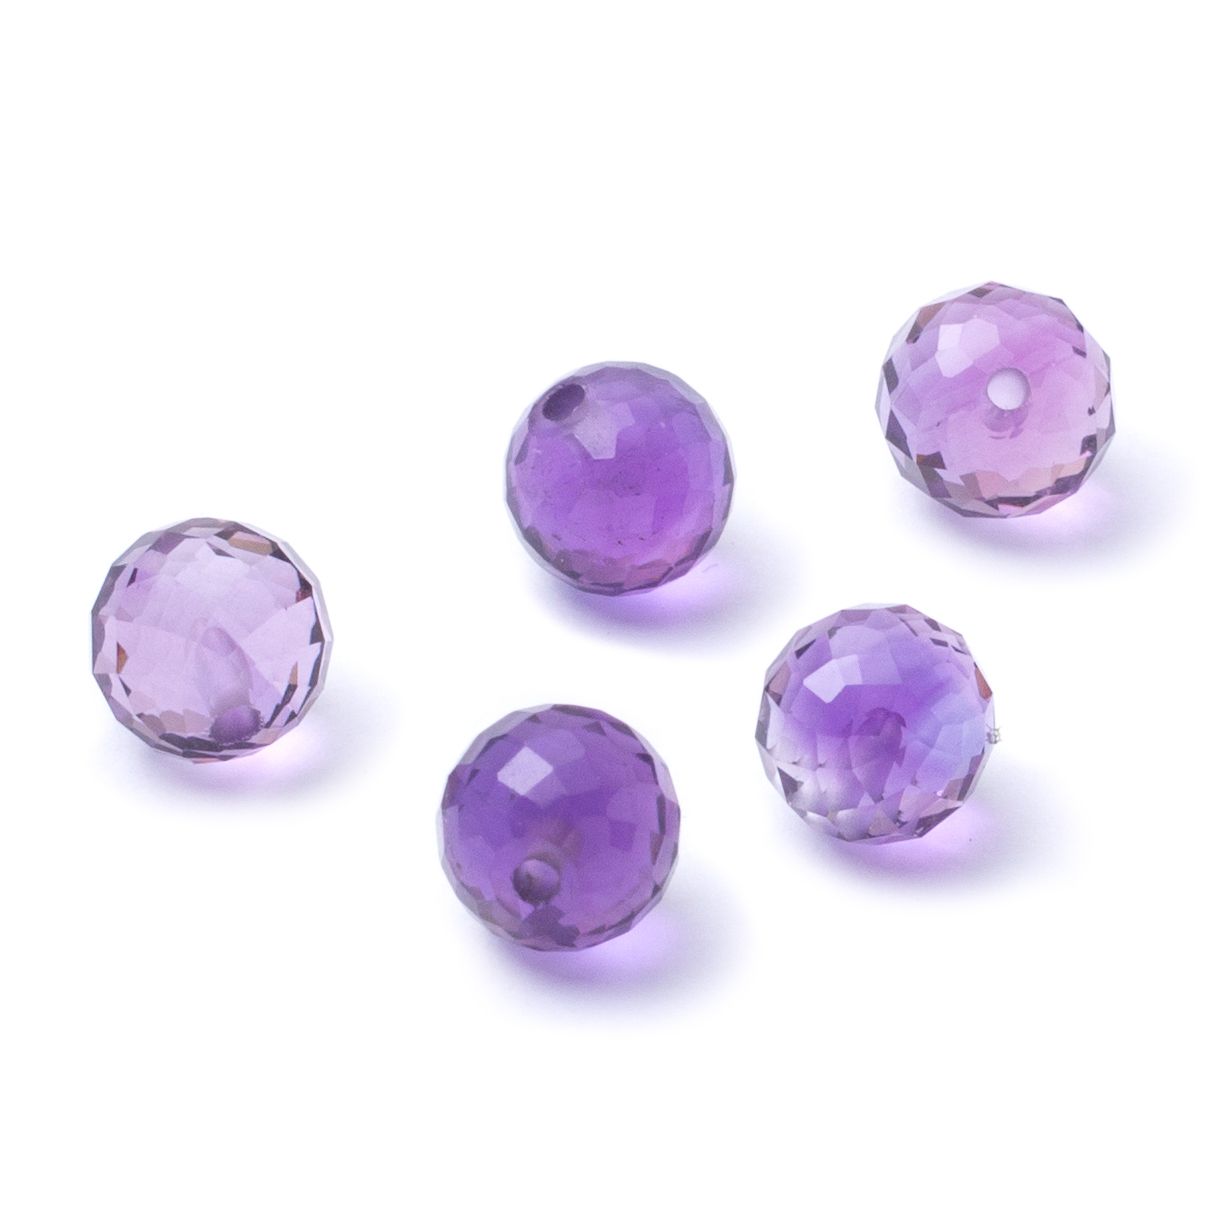 Amethyst Half Drilled Faceted Beads - Approx 6mm Round